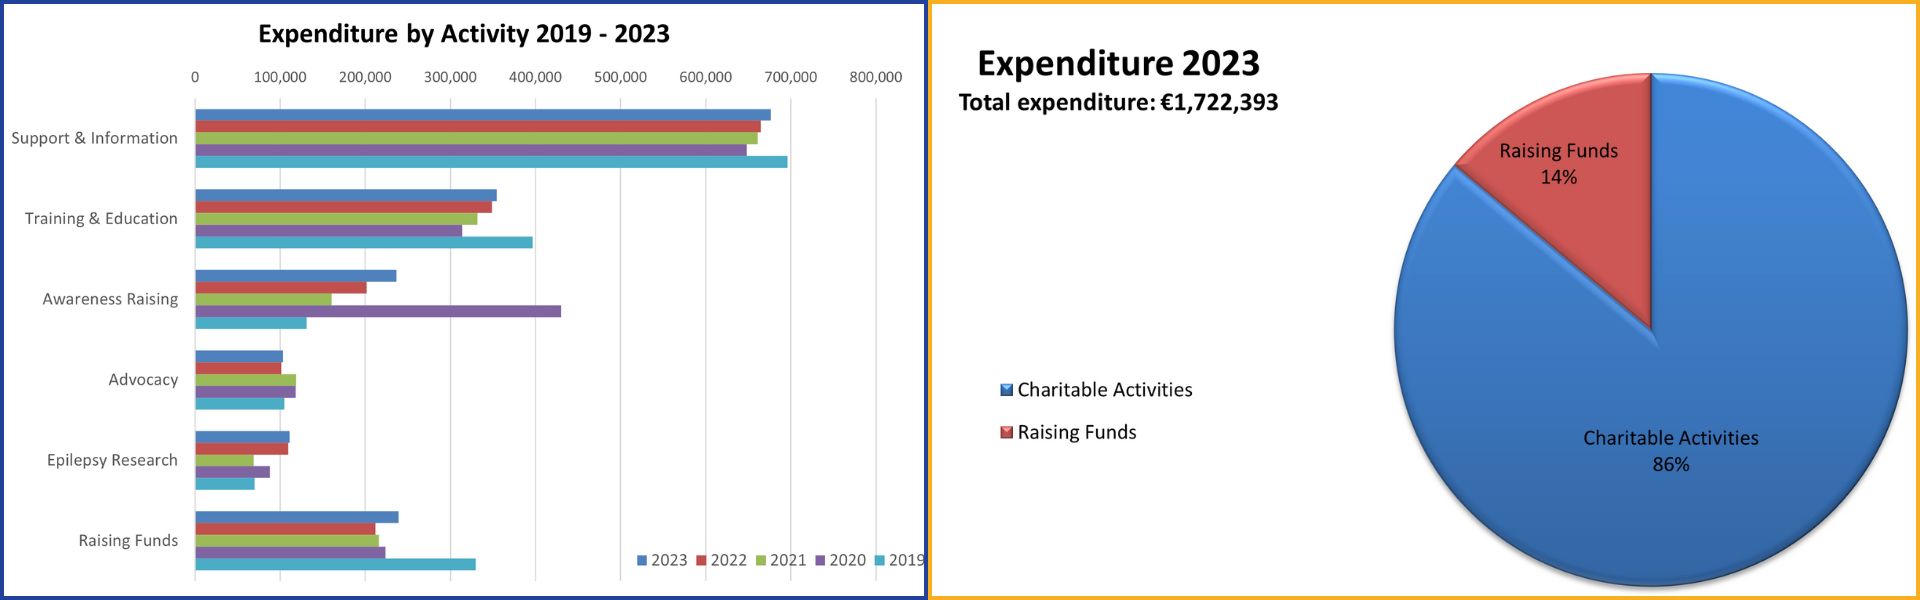 Chart showing expenditure by activity